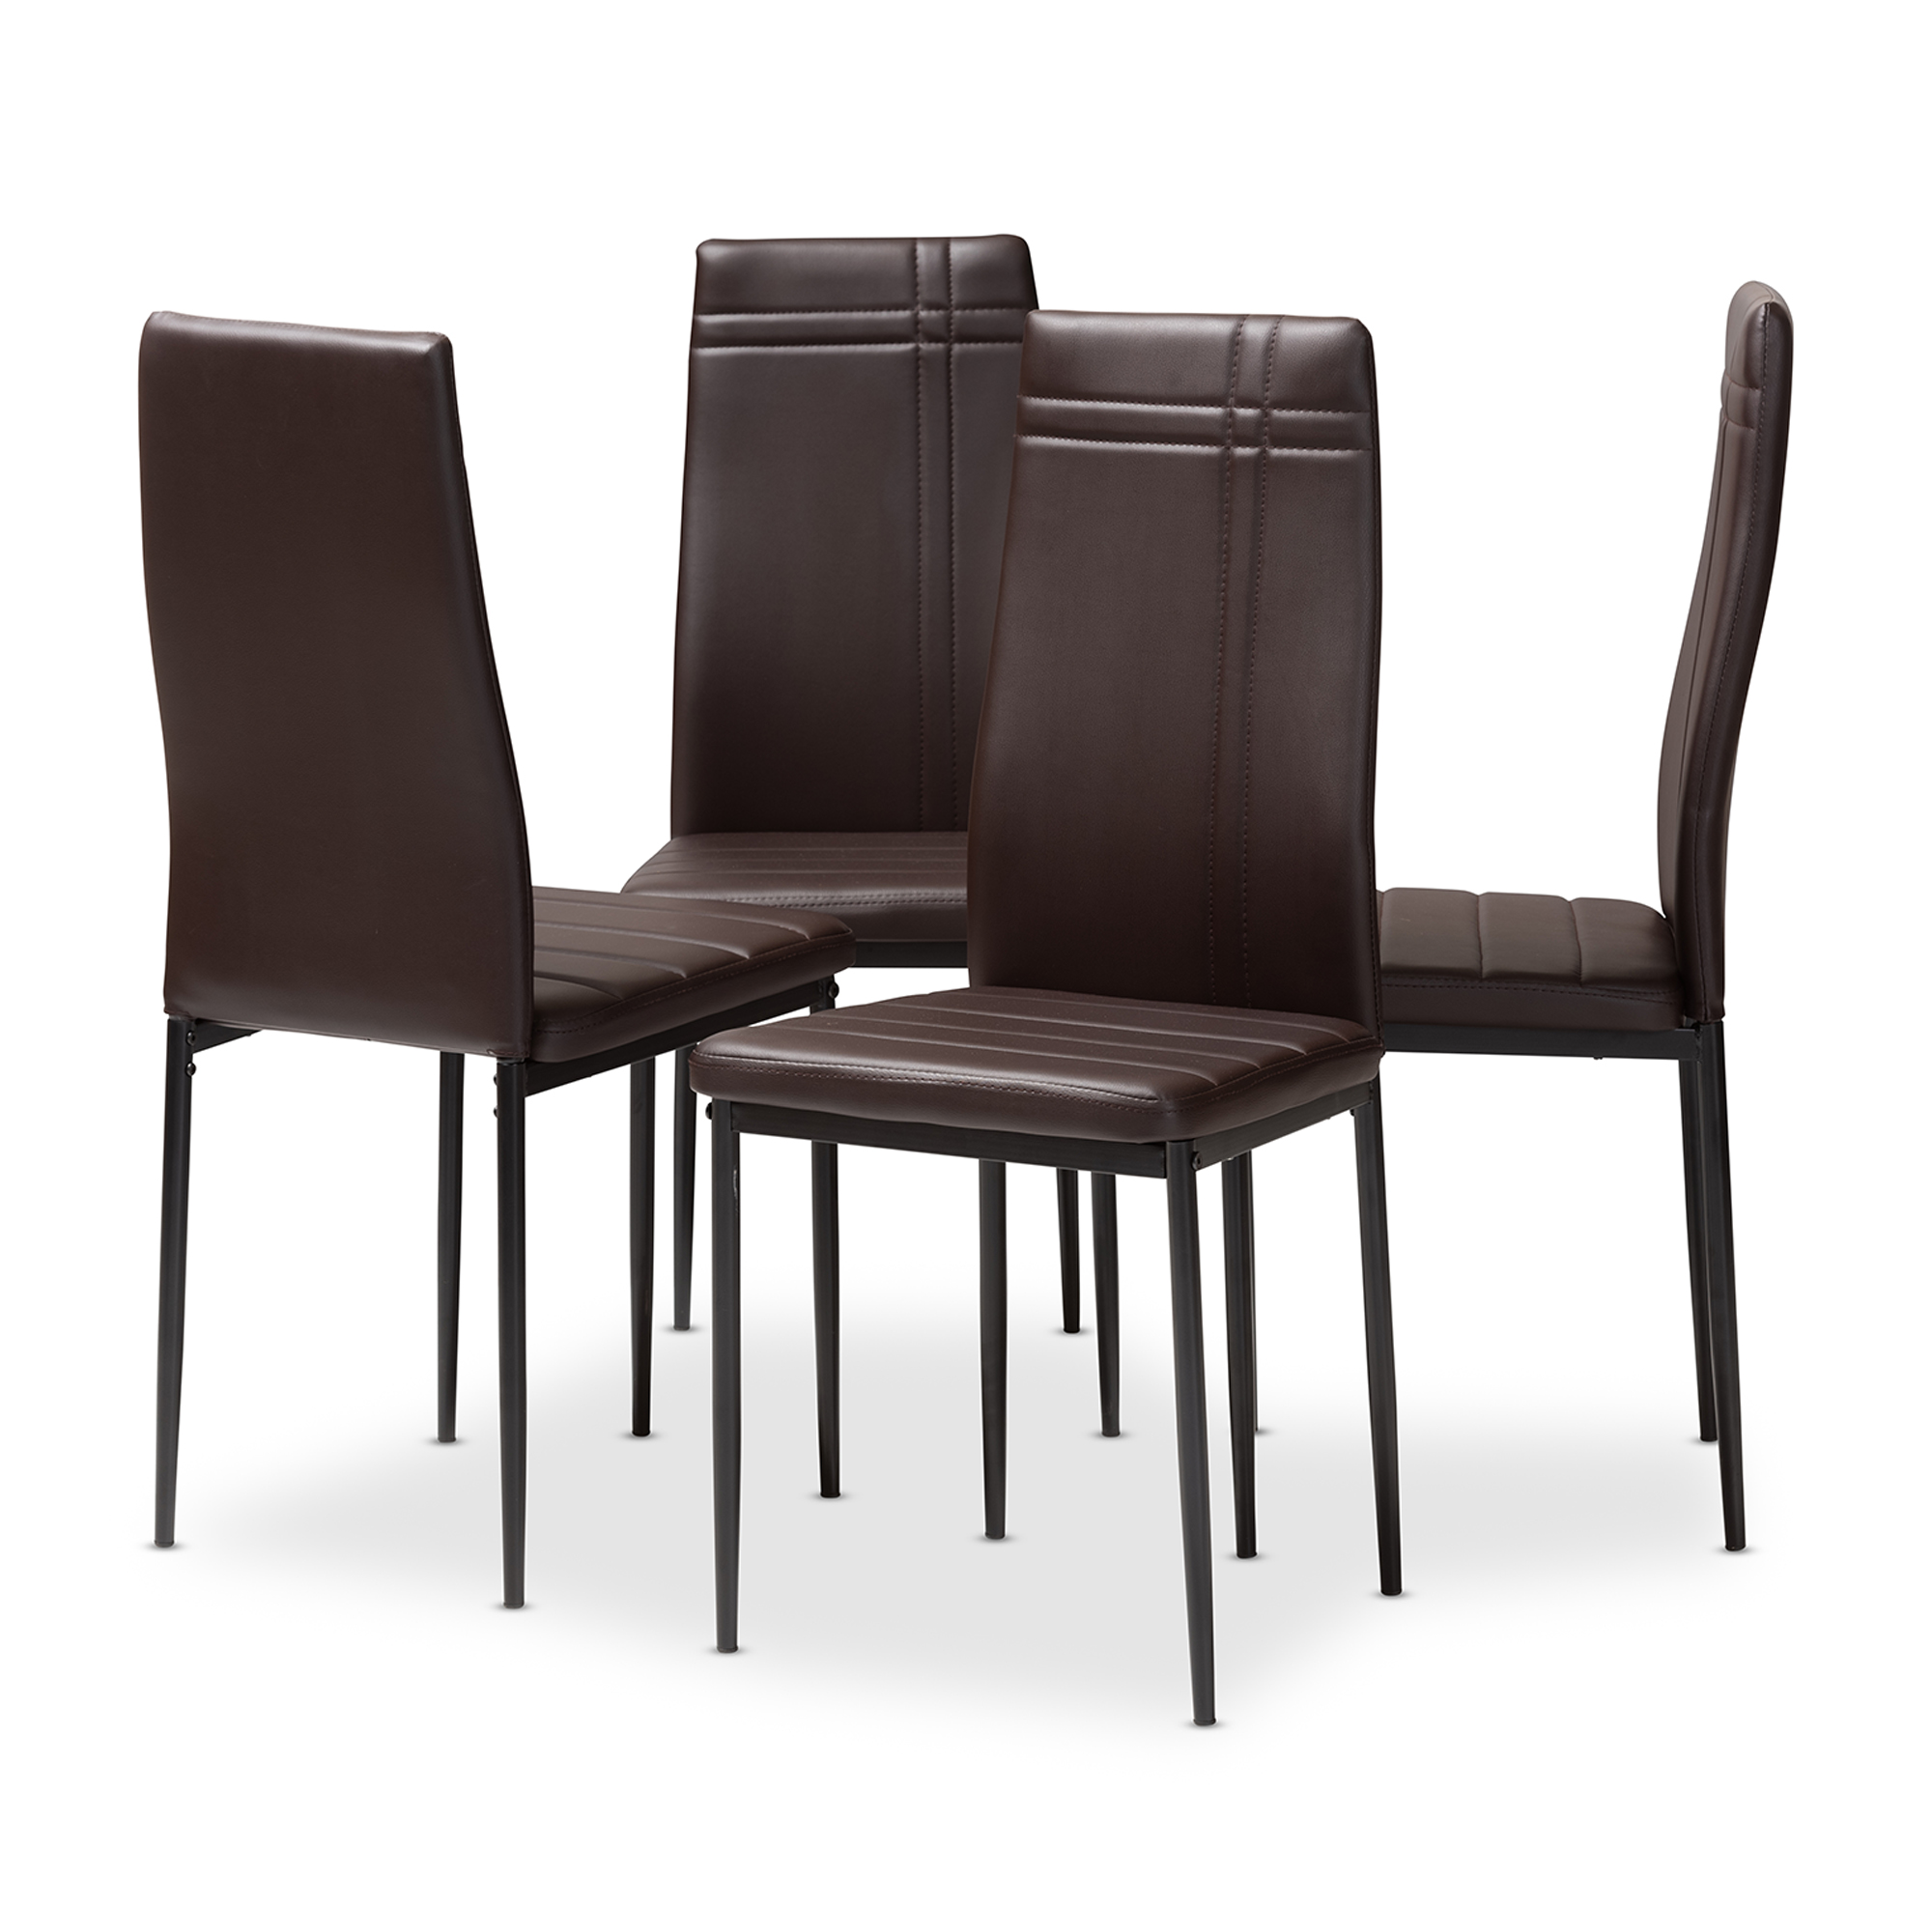 Baxton Studio Matiese Modern and Contemporary Brown Faux Leather Upholstered Dining Chair (Set of 4)